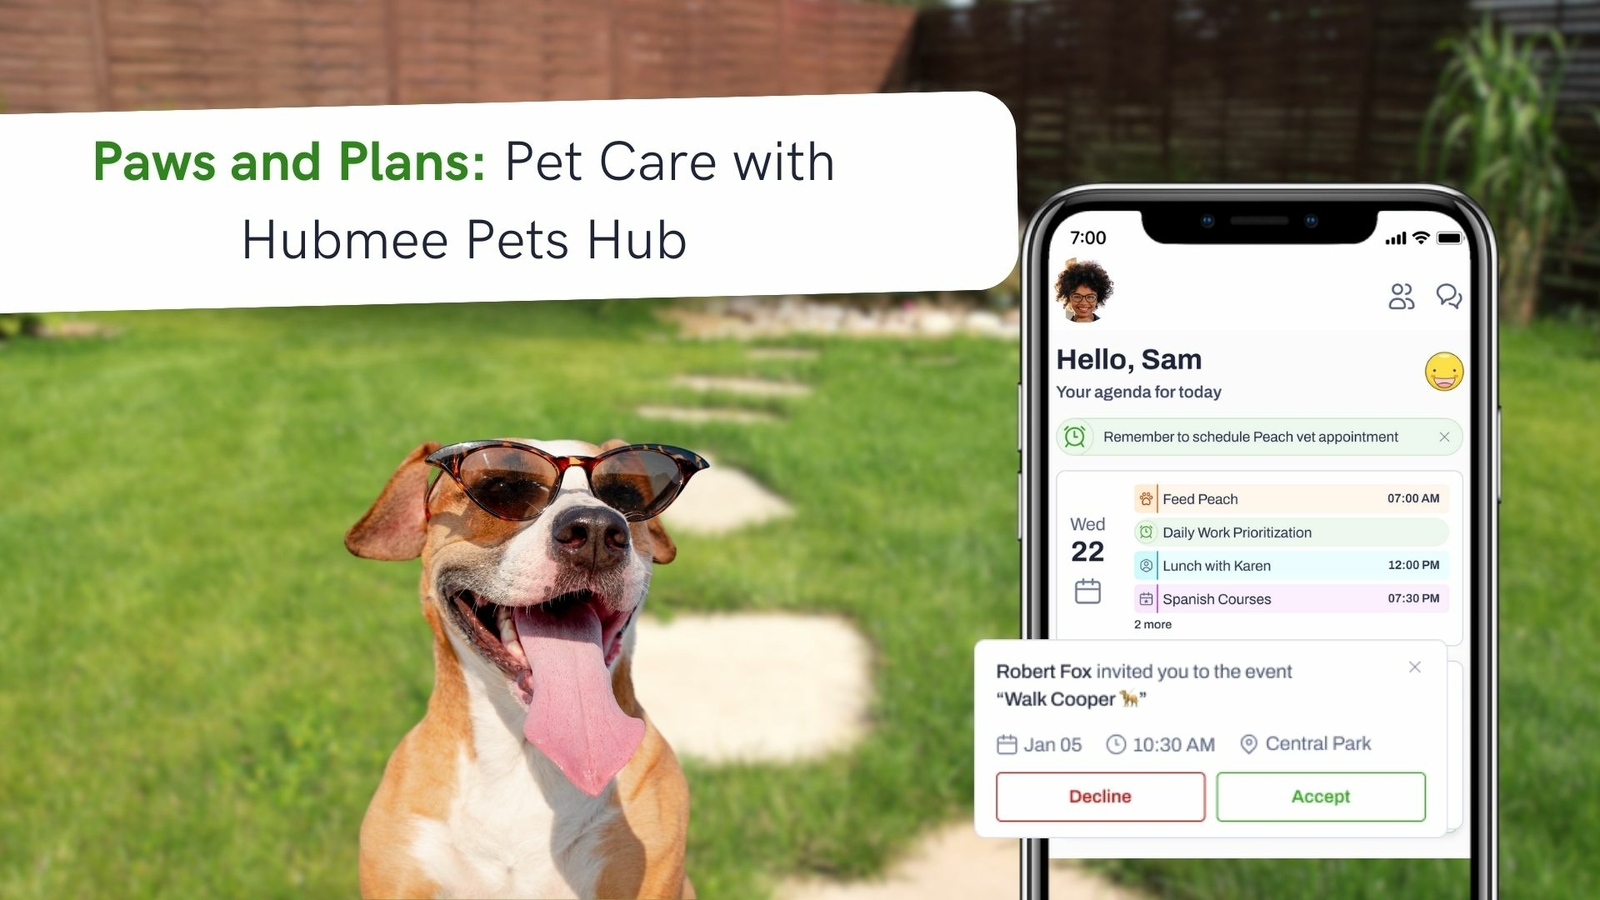 Paws and Plans: Pet Care with Hubmee Pets Hub